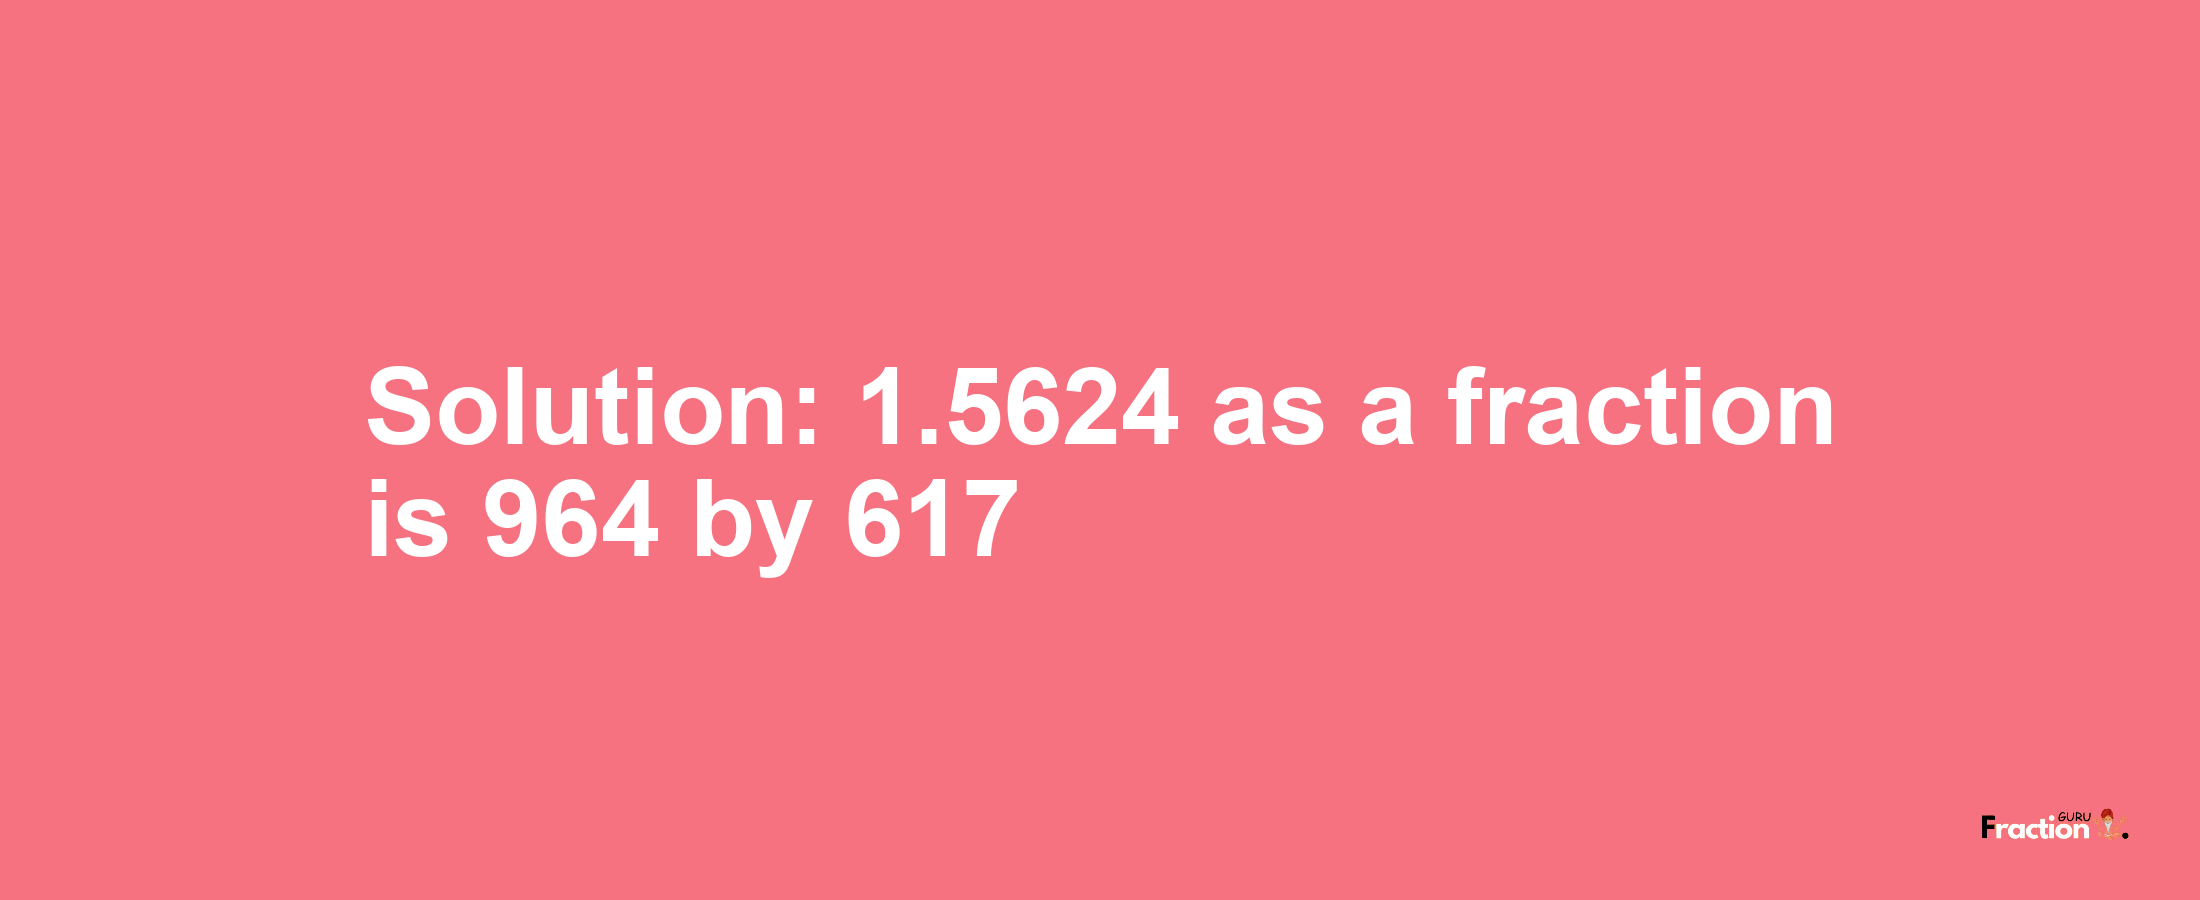 Solution:1.5624 as a fraction is 964/617